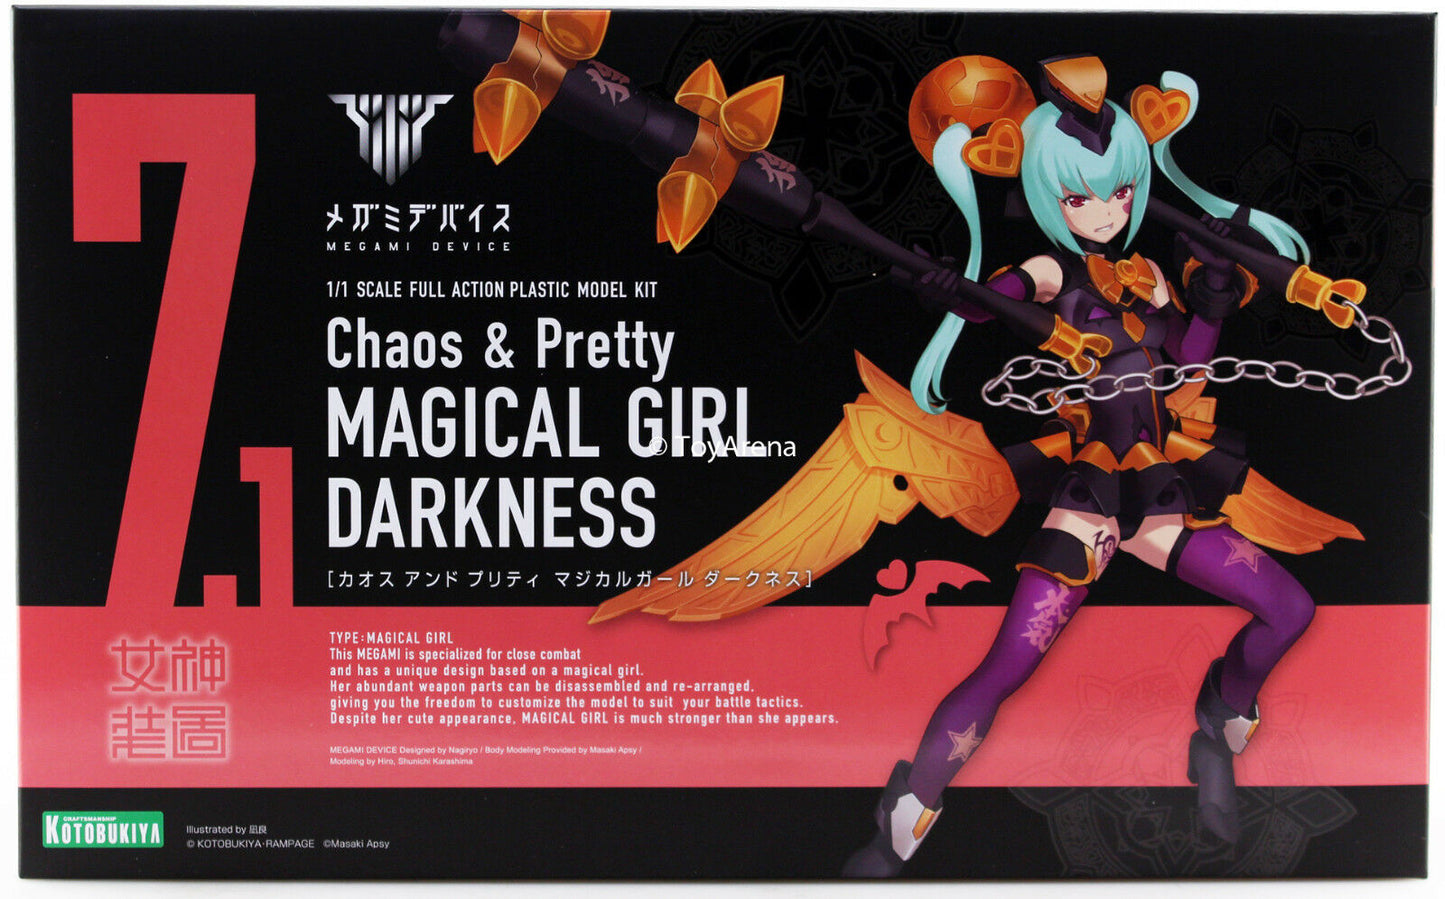 Megami Device: Chaos & Pretty Magical Girl Darkness